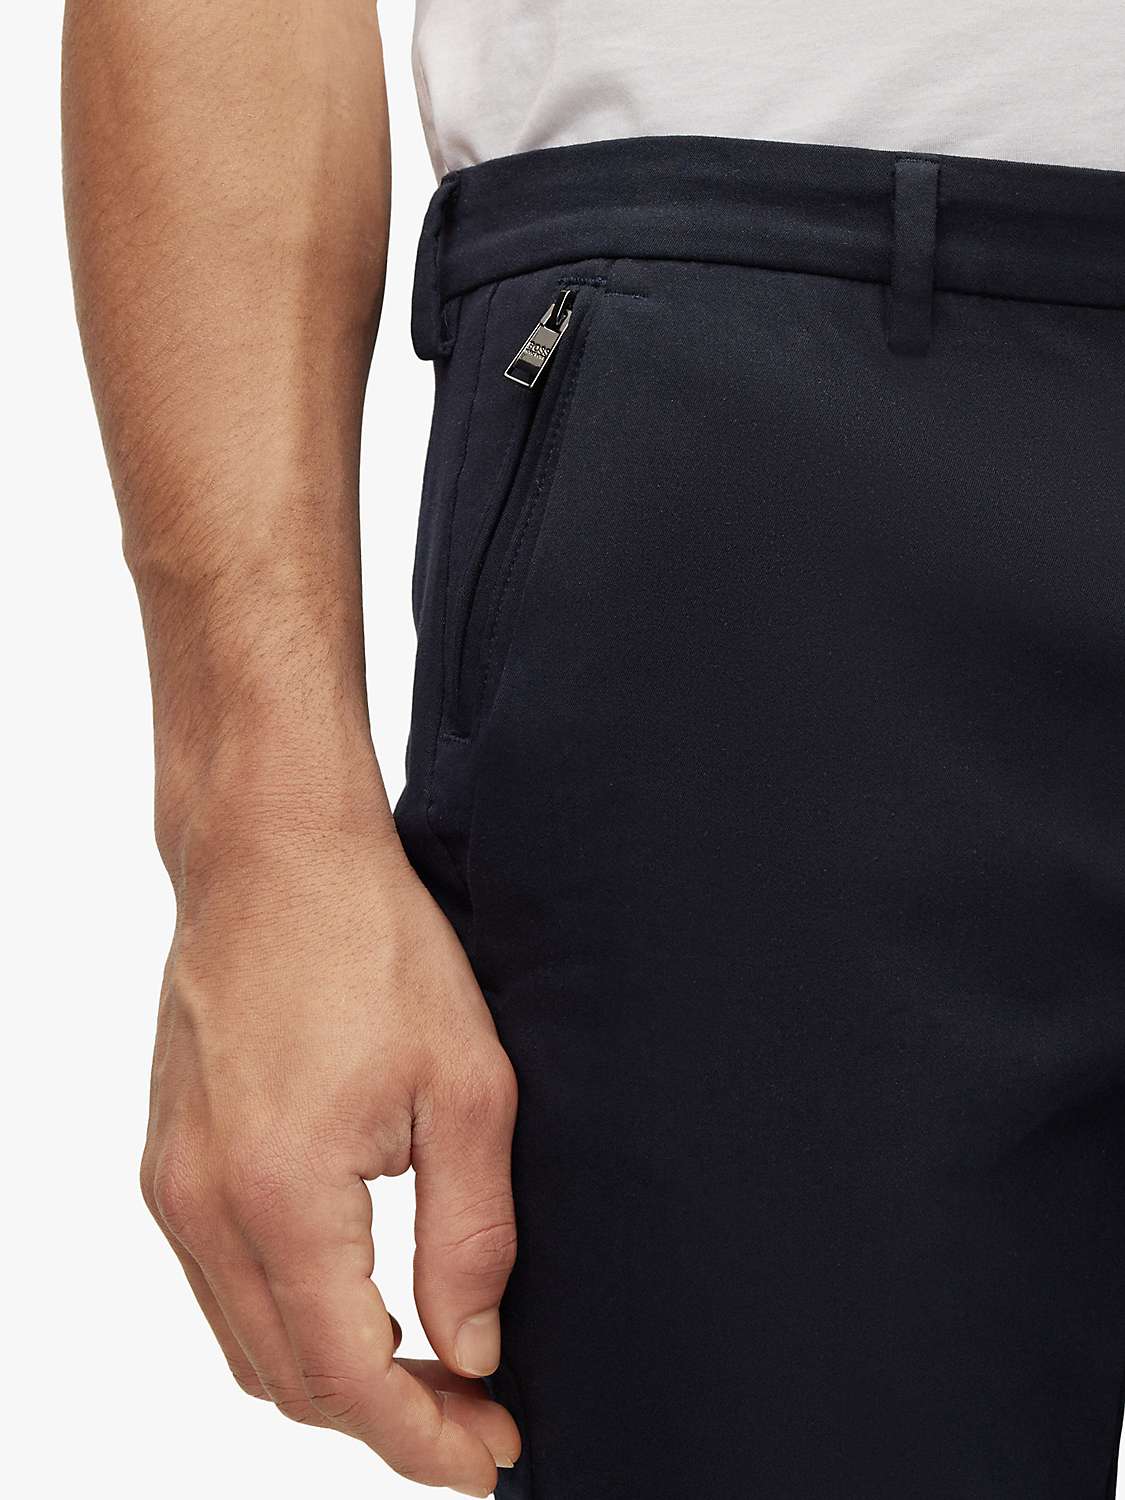 Buy BOSS Kaito Cotton Blend Slim Fit Trousers, Dark Blue Online at johnlewis.com